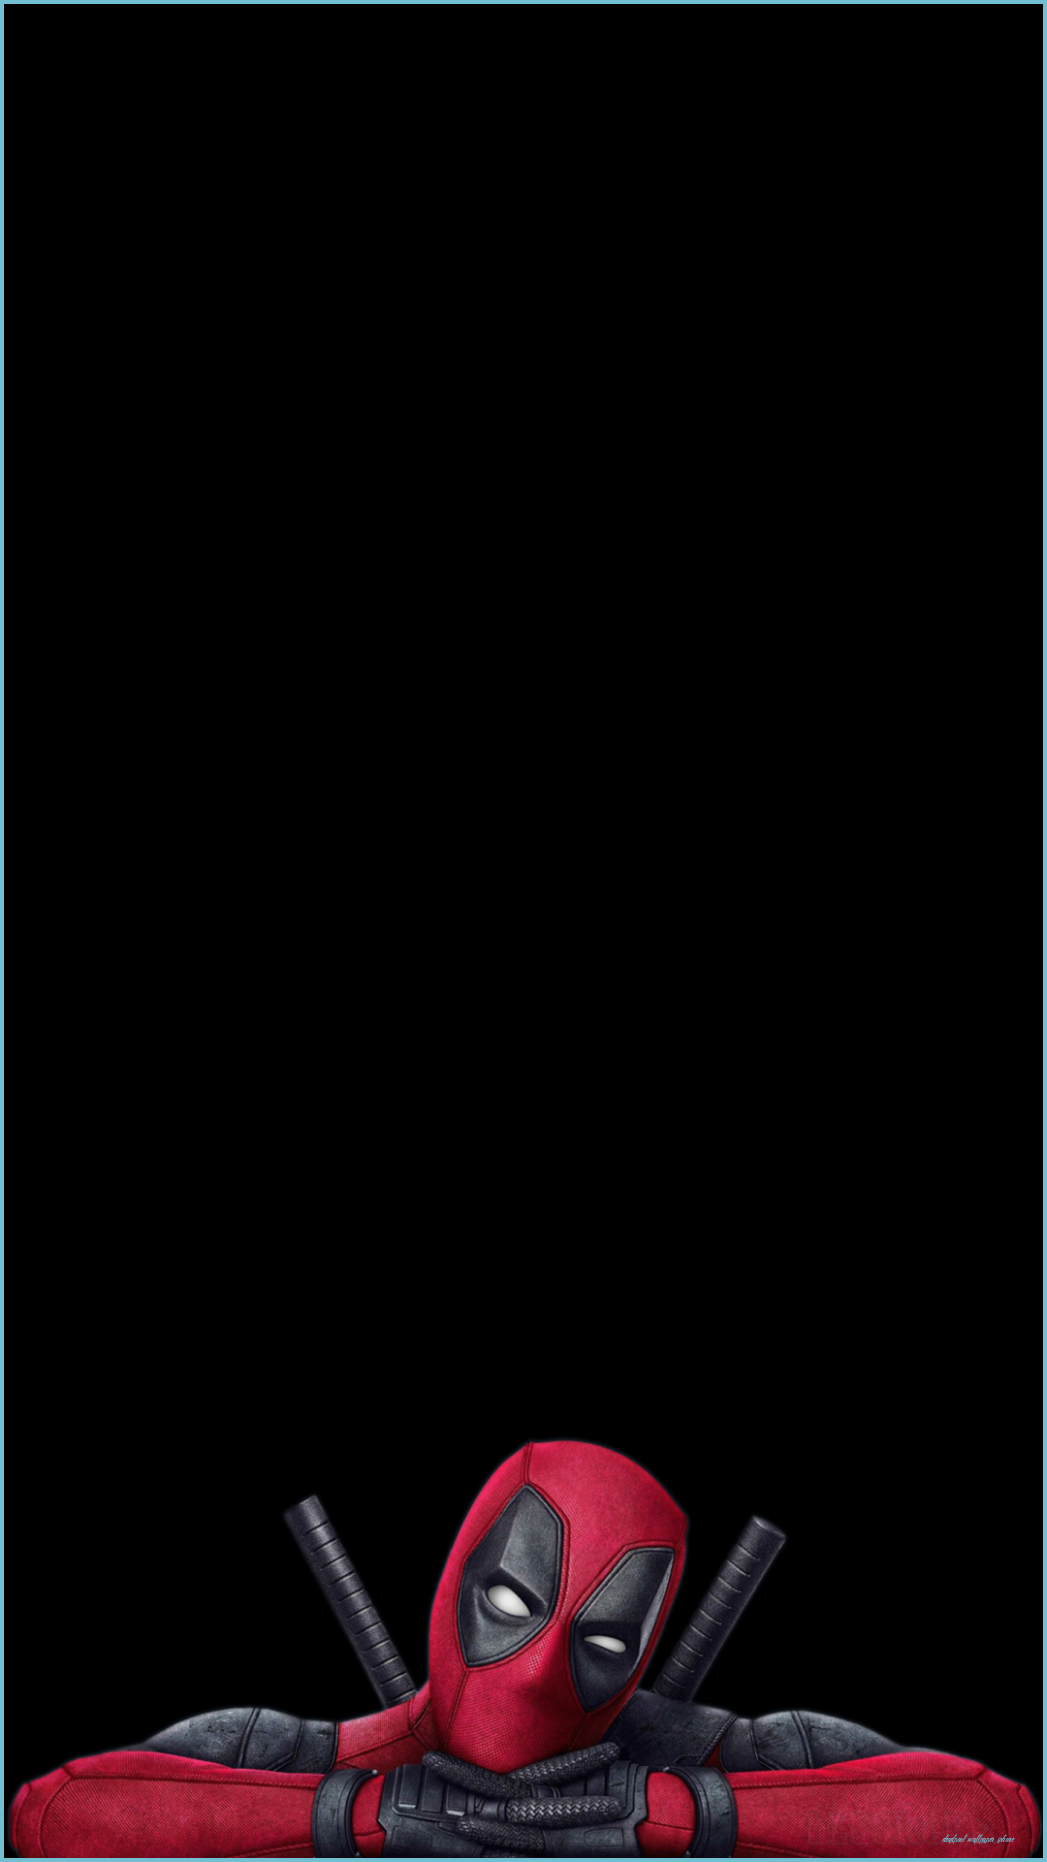 This Deadpool wallpaper for OLED phones is super nice on my iPhone wallpaper iphone